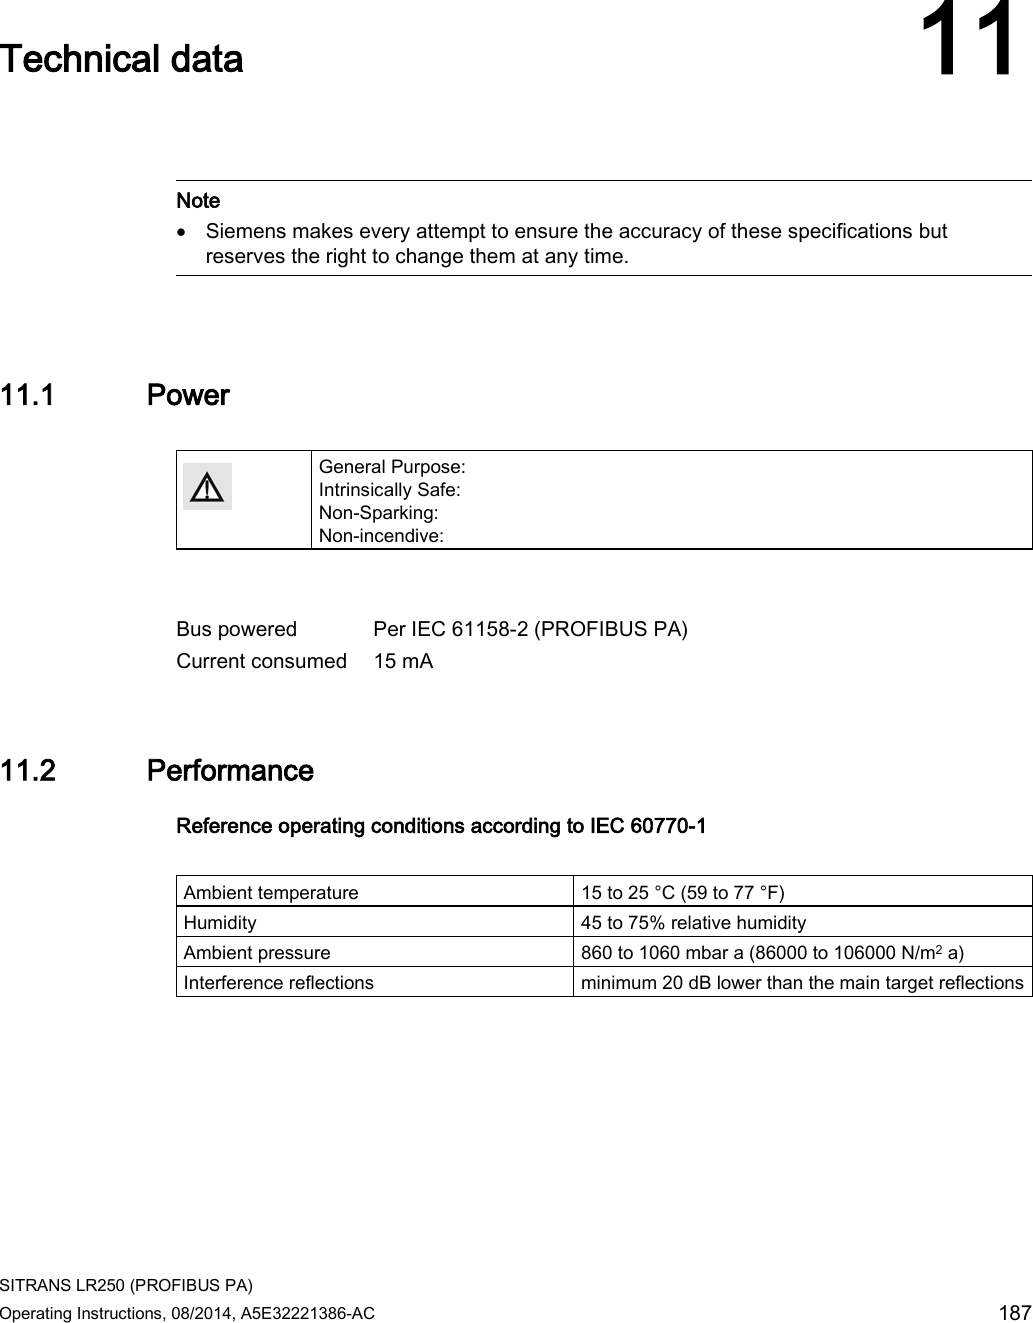  SITRANS LR250 (PROFIBUS PA) Operating Instructions, 08/2014, A5E32221386-AC 187  Technical data 11    Note • Siemens makes every attempt to ensure the accuracy of these specifications but reserves the right to change them at any time.  11.1 Power   General Purpose: Intrinsically Safe: Non-Sparking: Non-incendive:   Bus powered Per IEC 61158-2 (PROFIBUS PA) Current consumed 15 mA 11.2 Performance Reference operating conditions according to IEC 60770-1  Ambient temperature 15 to 25 °C (59 to 77 °F) Humidity 45 to 75% relative humidity Ambient pressure 860 to 1060 mbar a (86000 to 106000 N/m2 a) Interference reflections minimum 20 dB lower than the main target reflections 